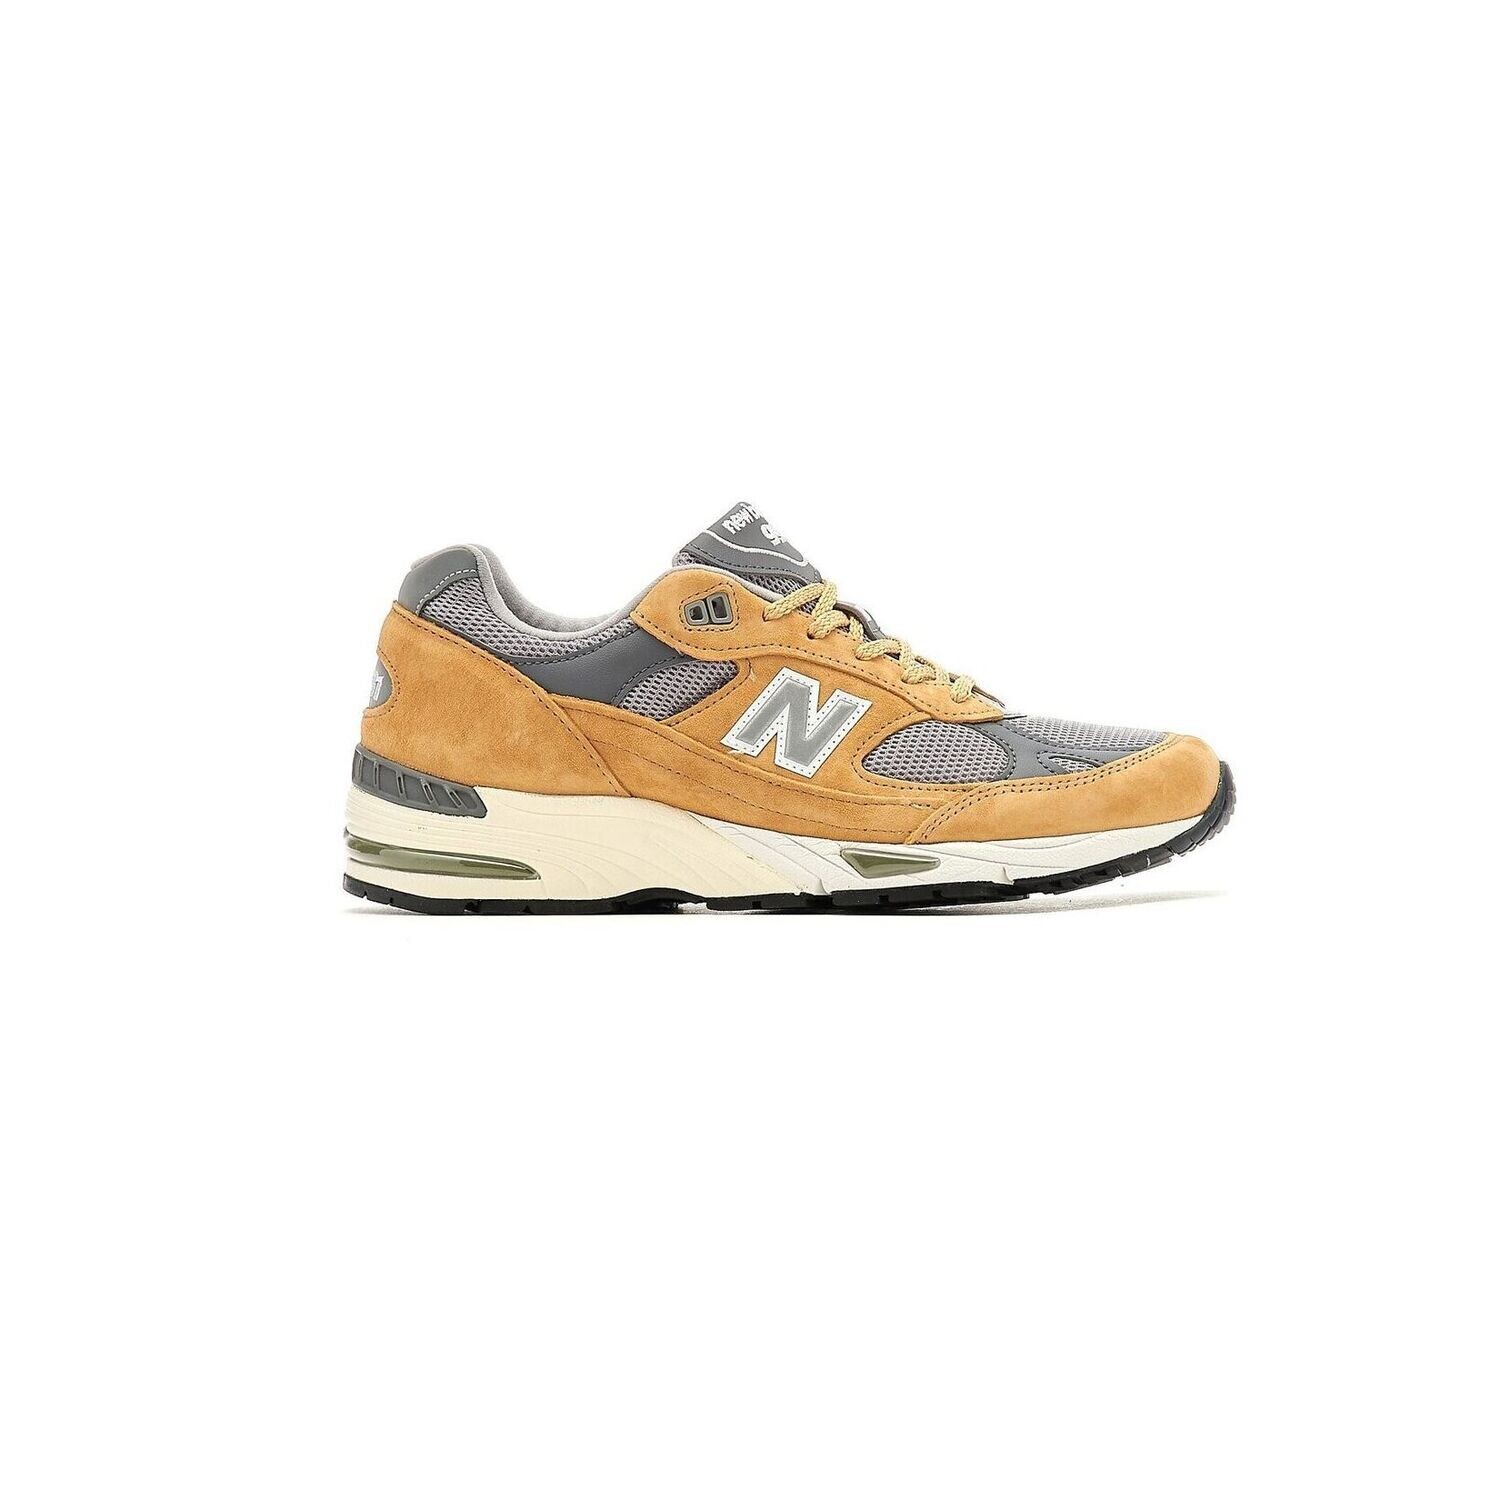 New Balance 991 "Sandstone Pack" Made in UK